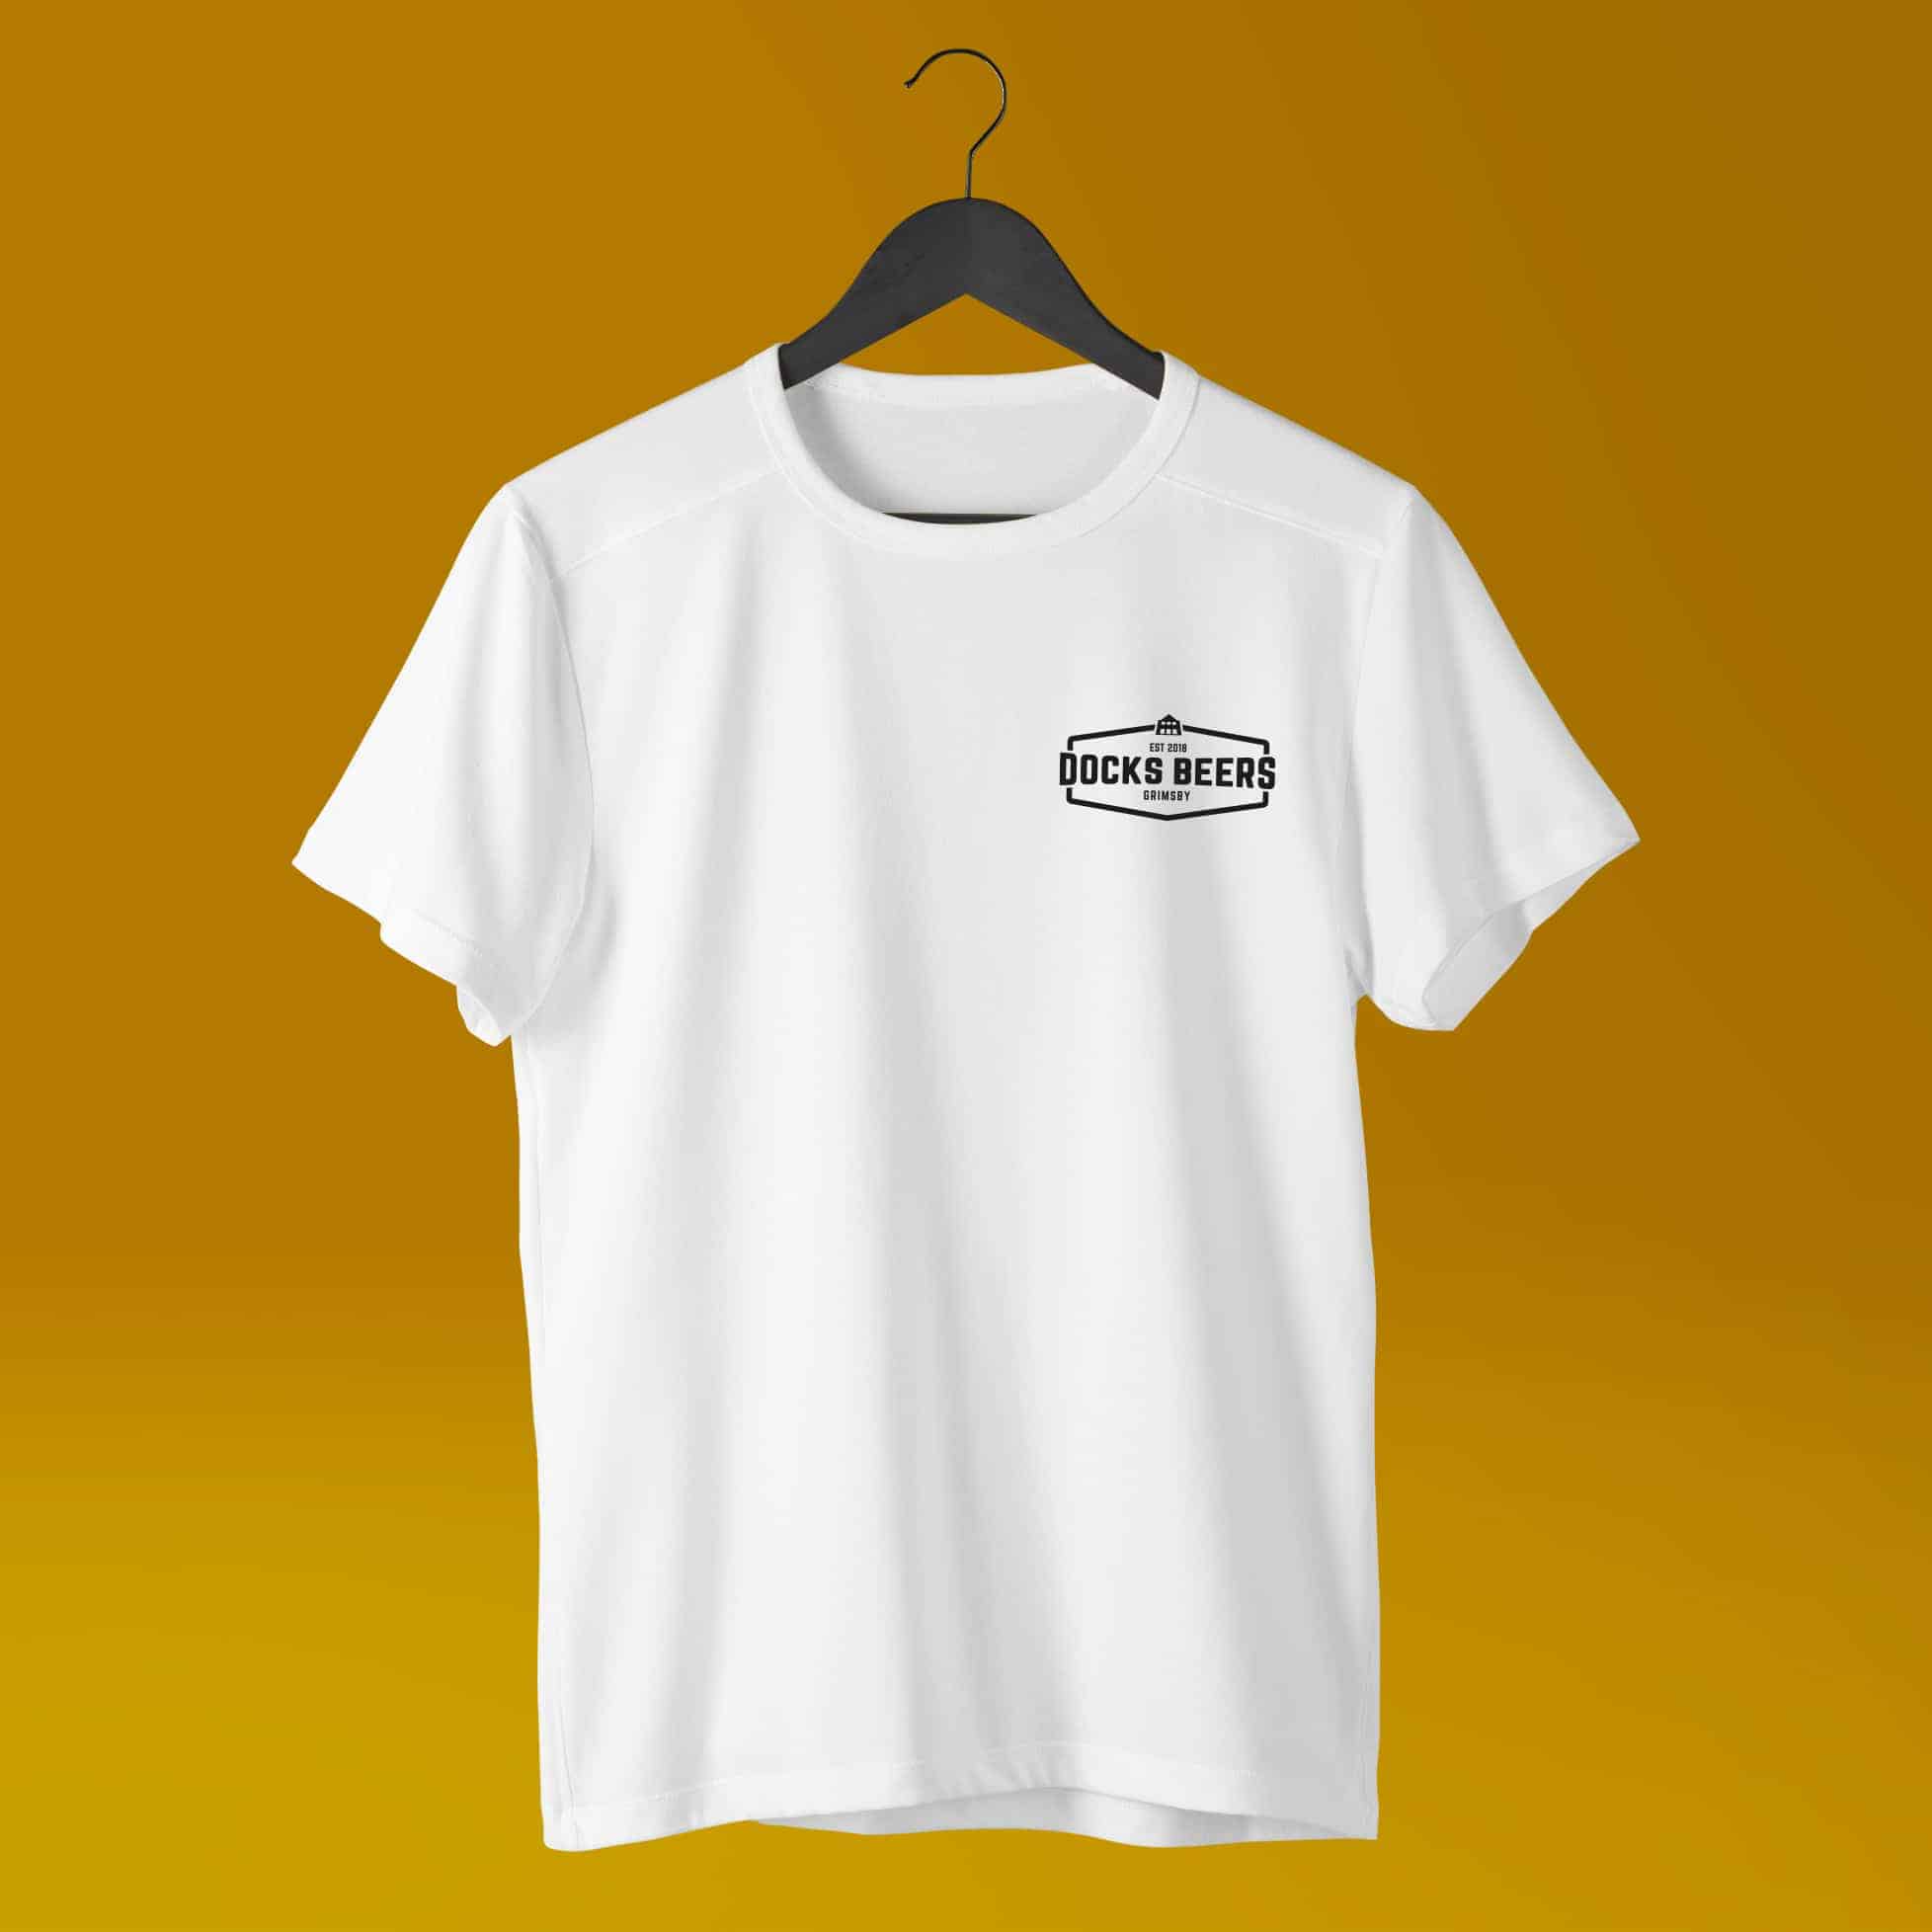 Docks Beers White T Shirt (S-XXL) - Products - Clothing